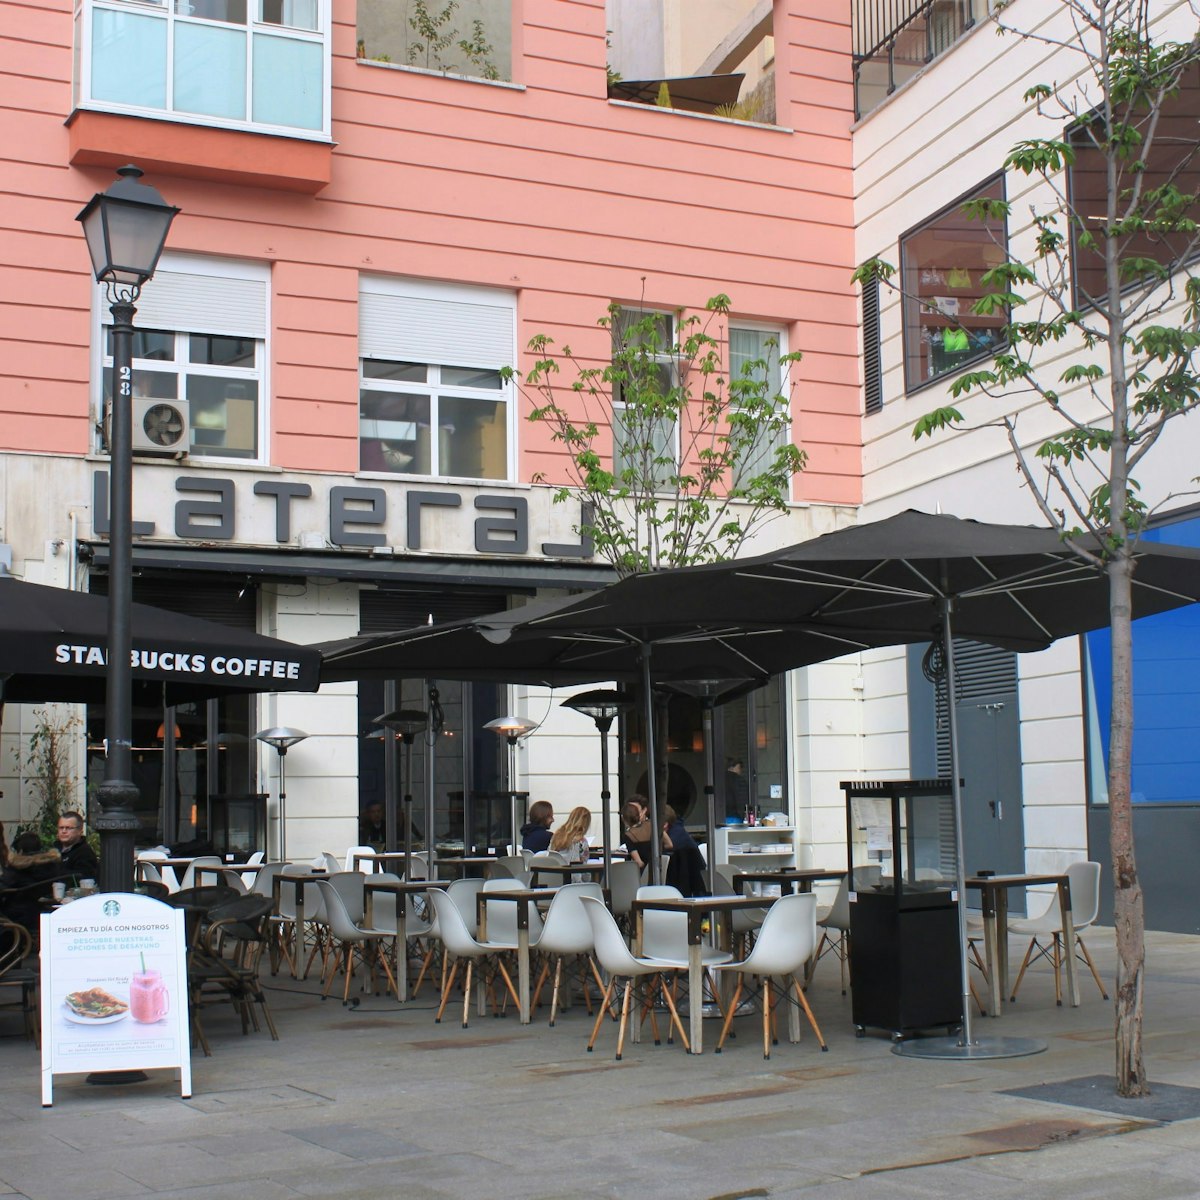 Lateral's laid-back patio on Calle Fuencarral.